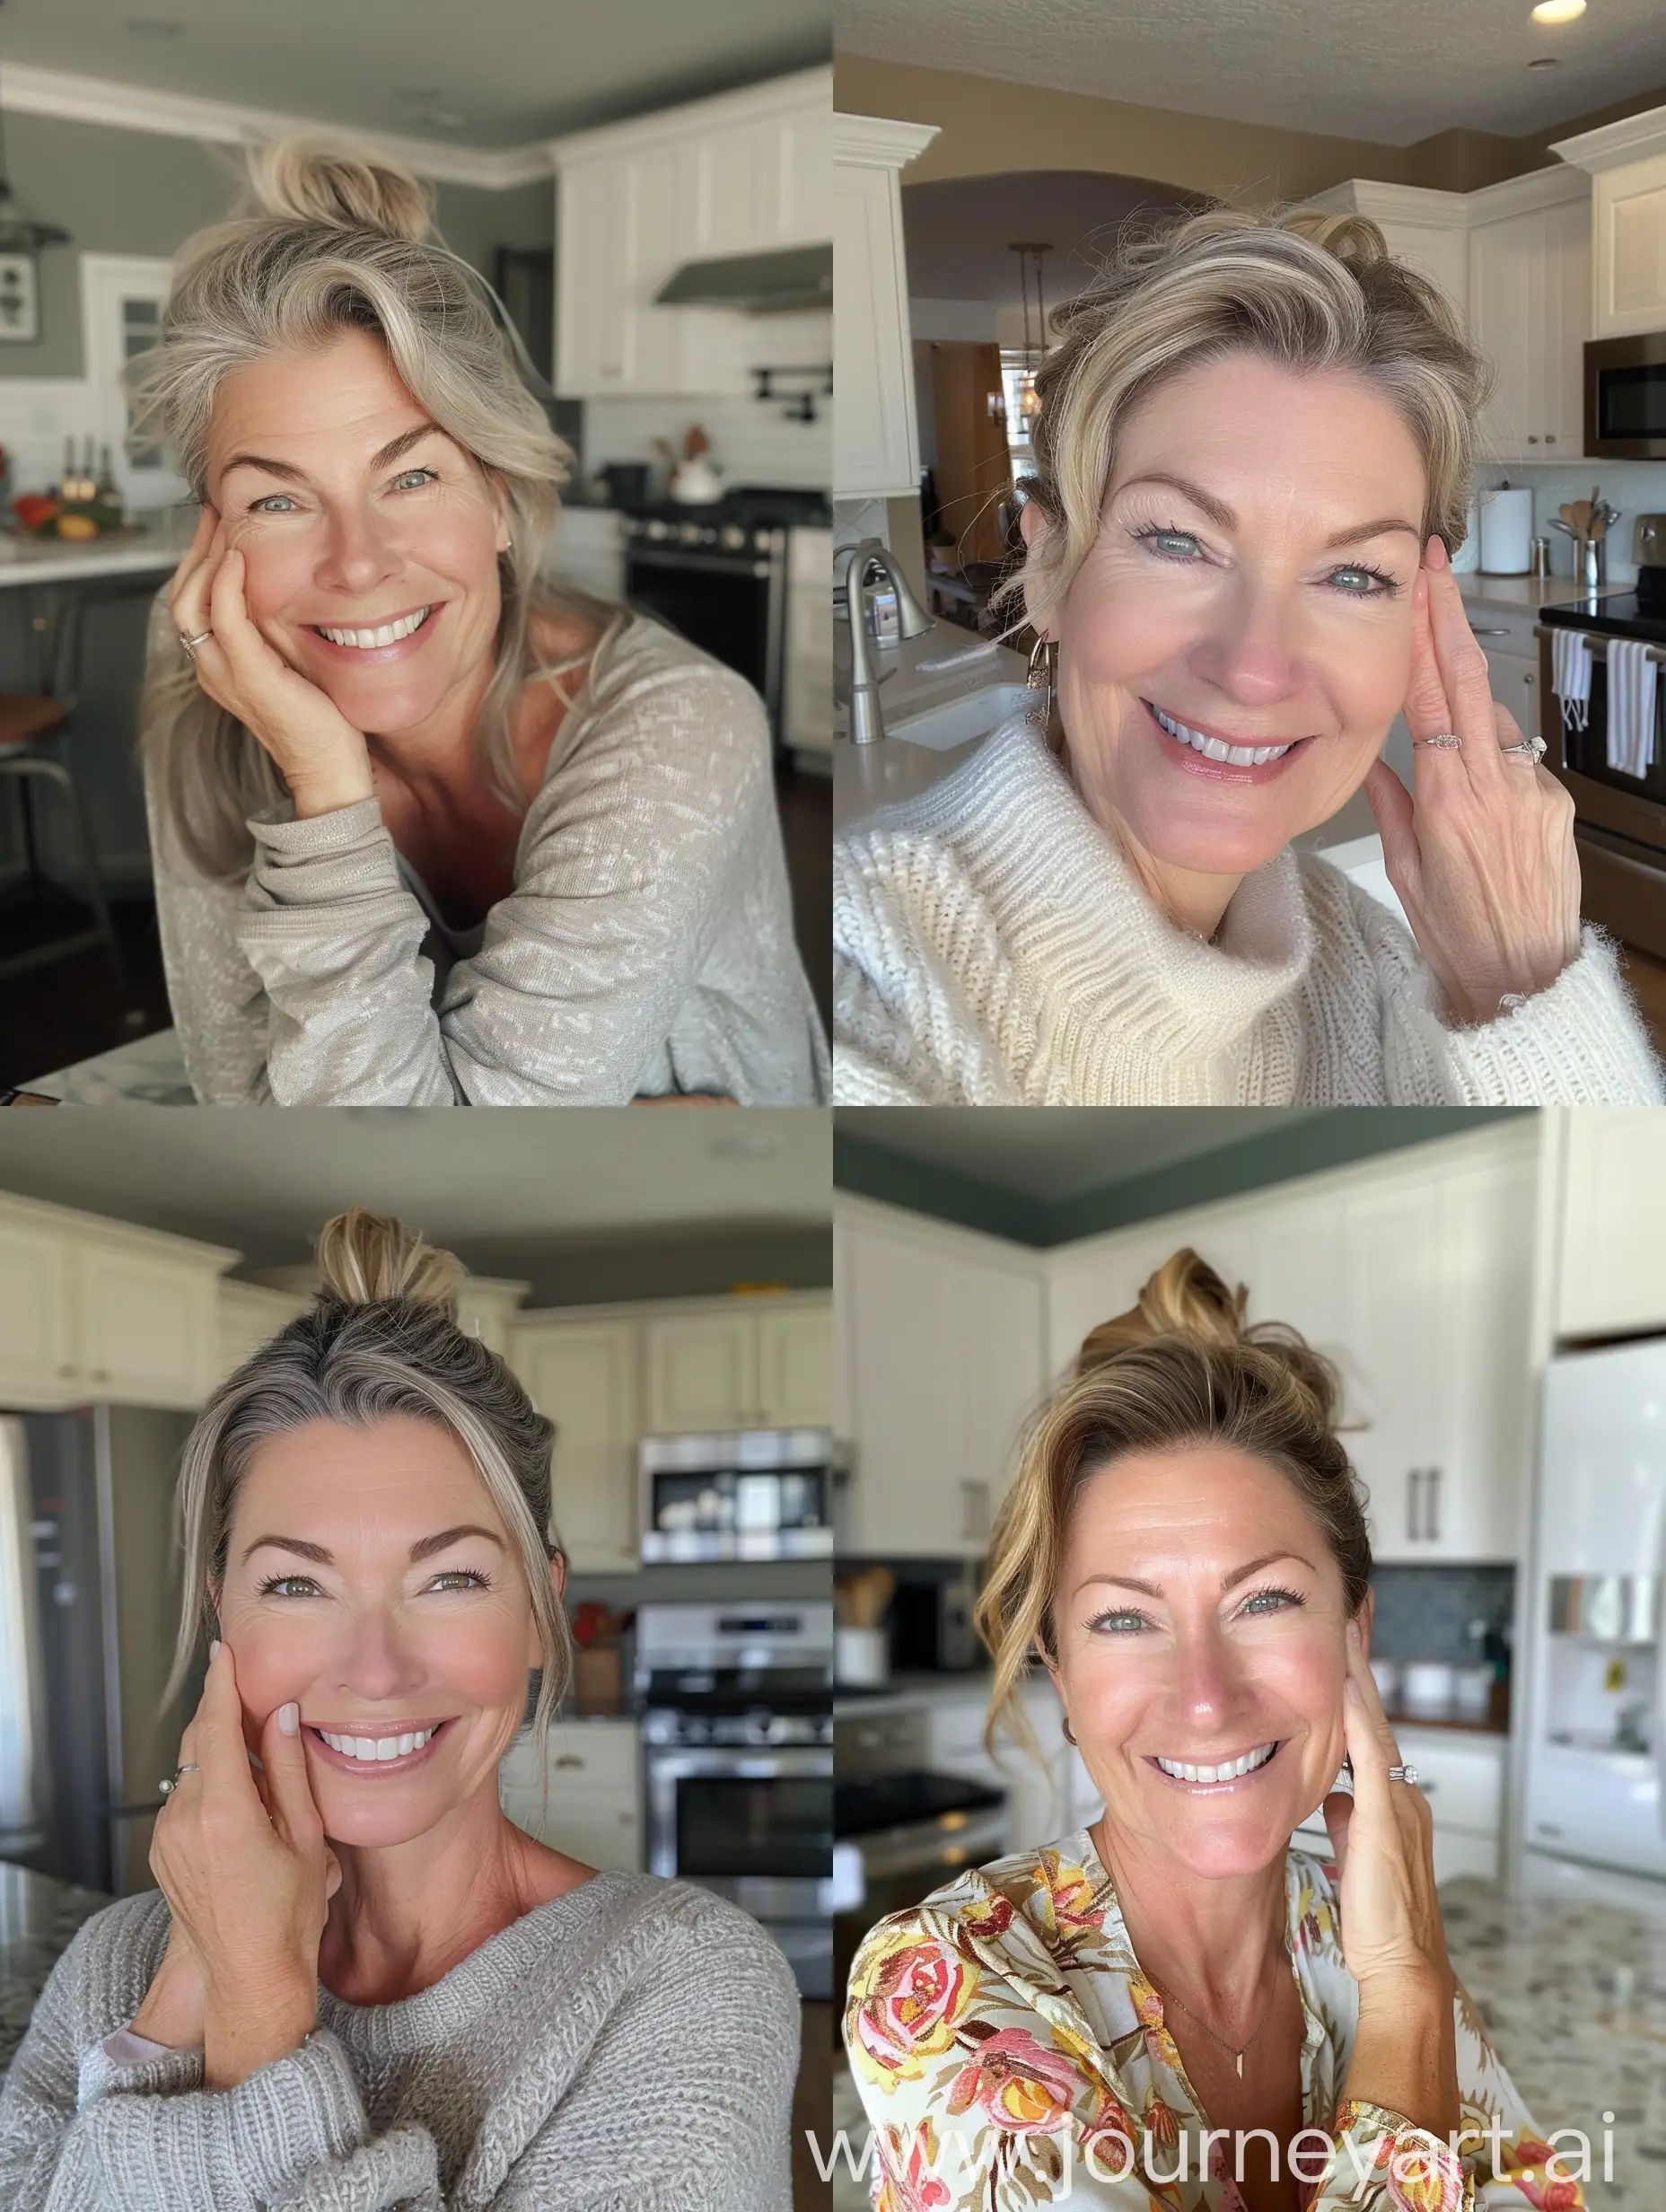 Aesthetic Instagram selfie of an average suburban white mother in her kitchen, smiling, Karen, super model face, in her 40's, gorgeous, high cheekbones, jawline, one hand on cheek, wedding ring 9:16